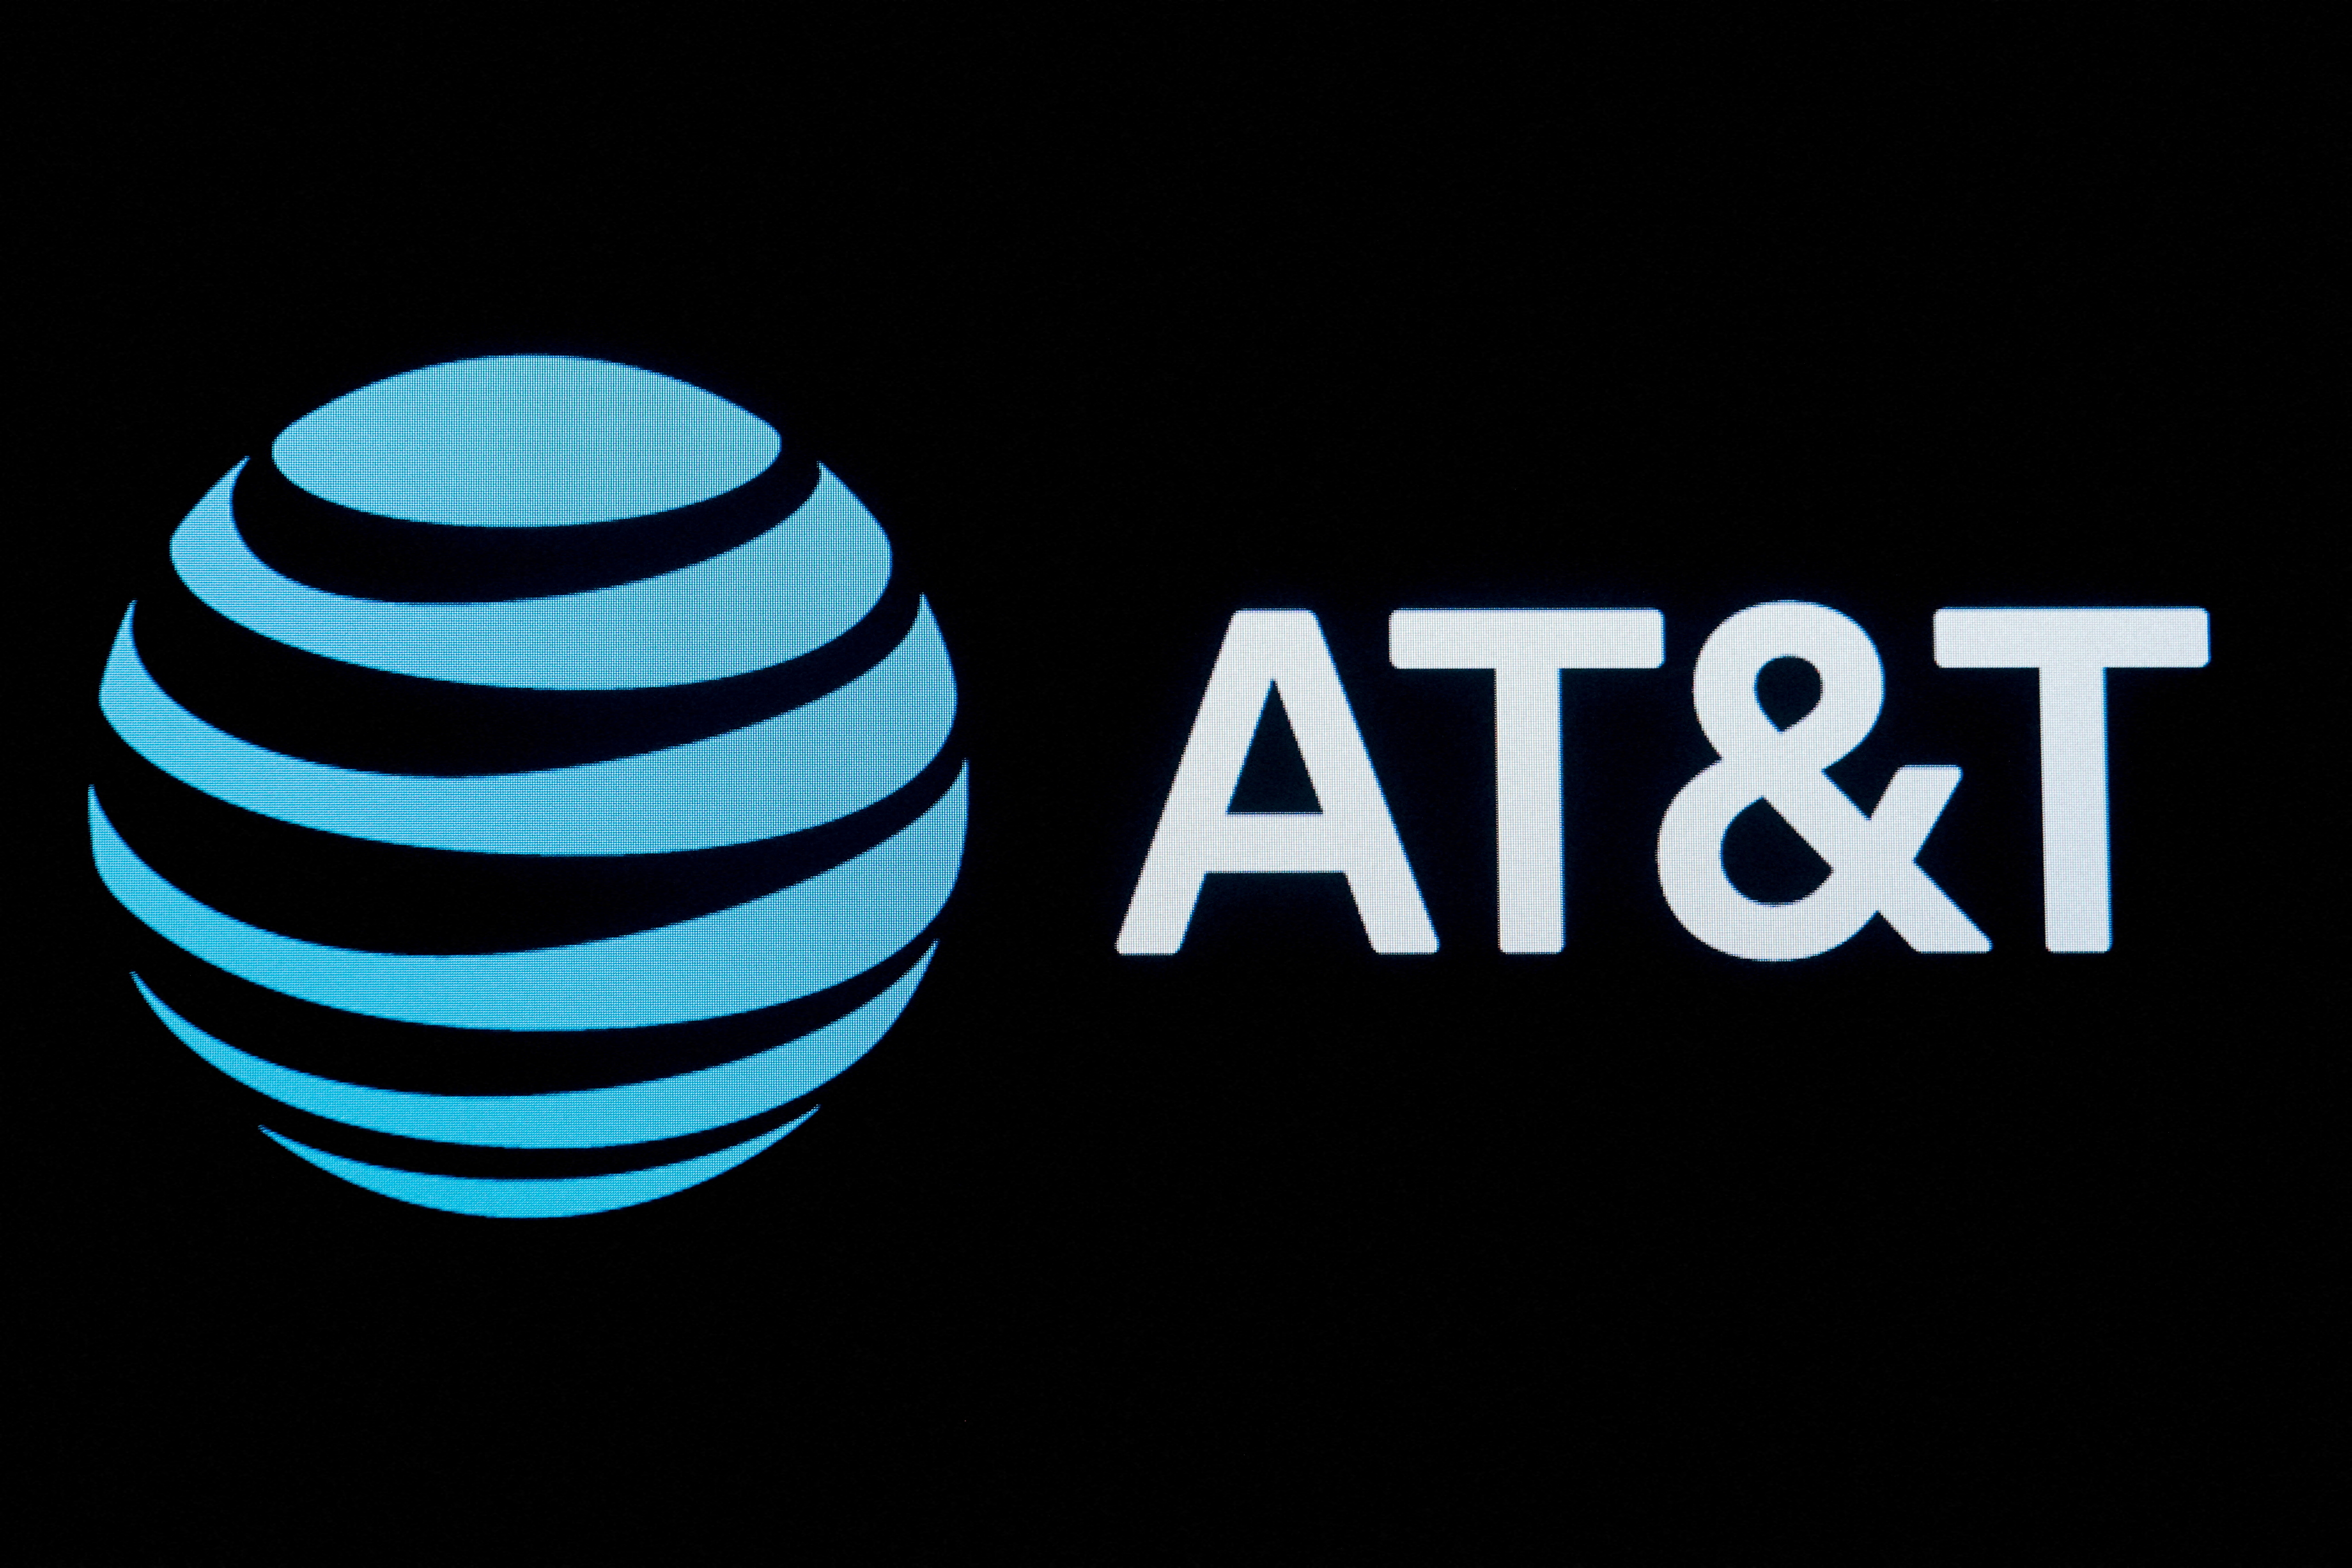 The company logo for AT&T